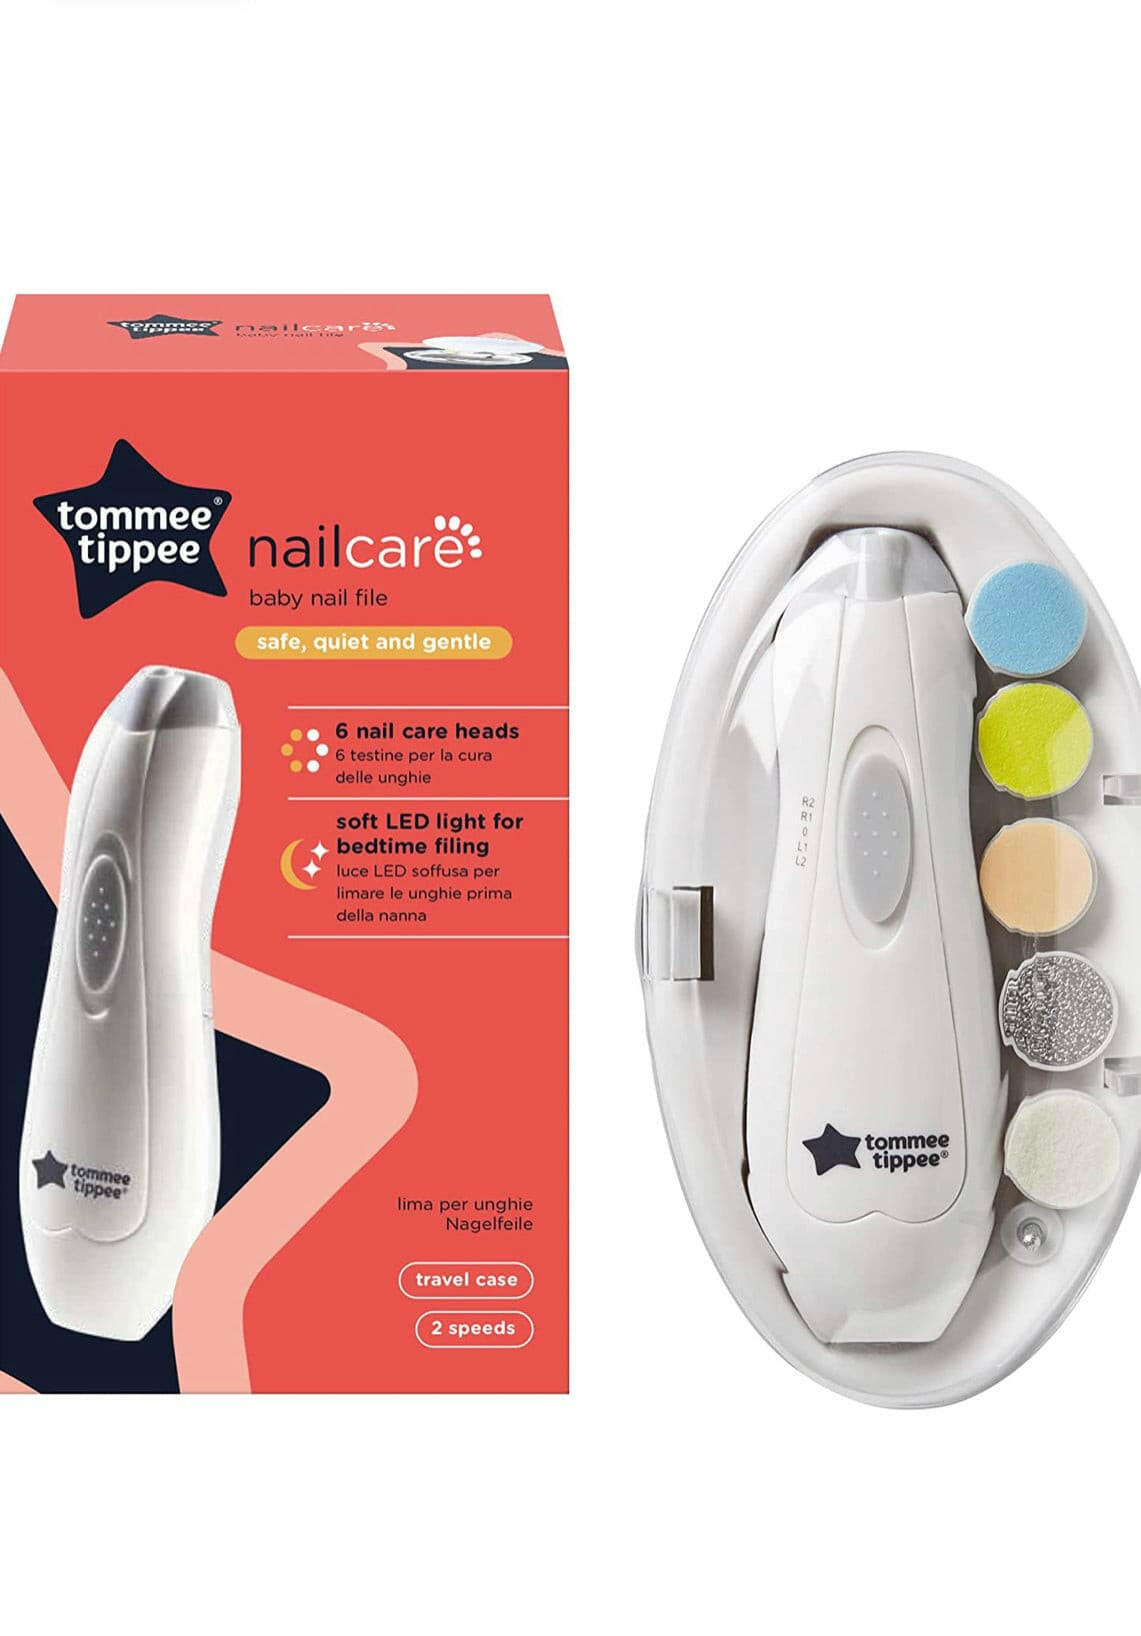 Tommee Tippee - Electric Baby & Toddler Nail File Trimmer.